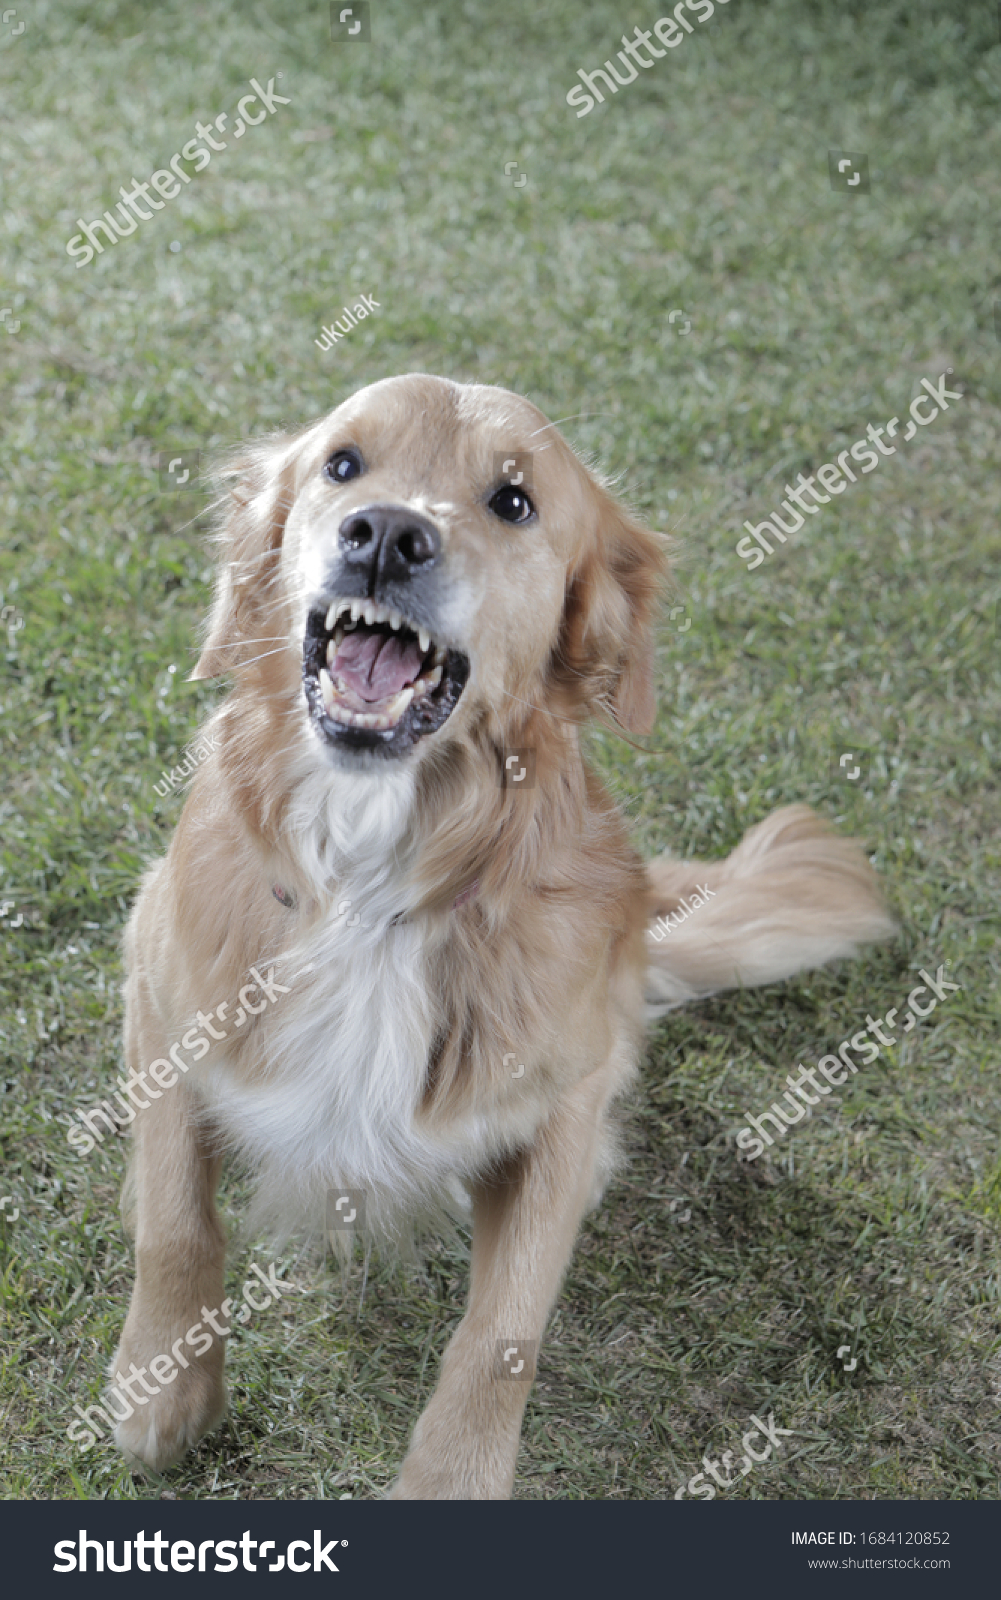 Angry Golden Retriever Barking On Someone Stock Photo Edit Now 1684120852